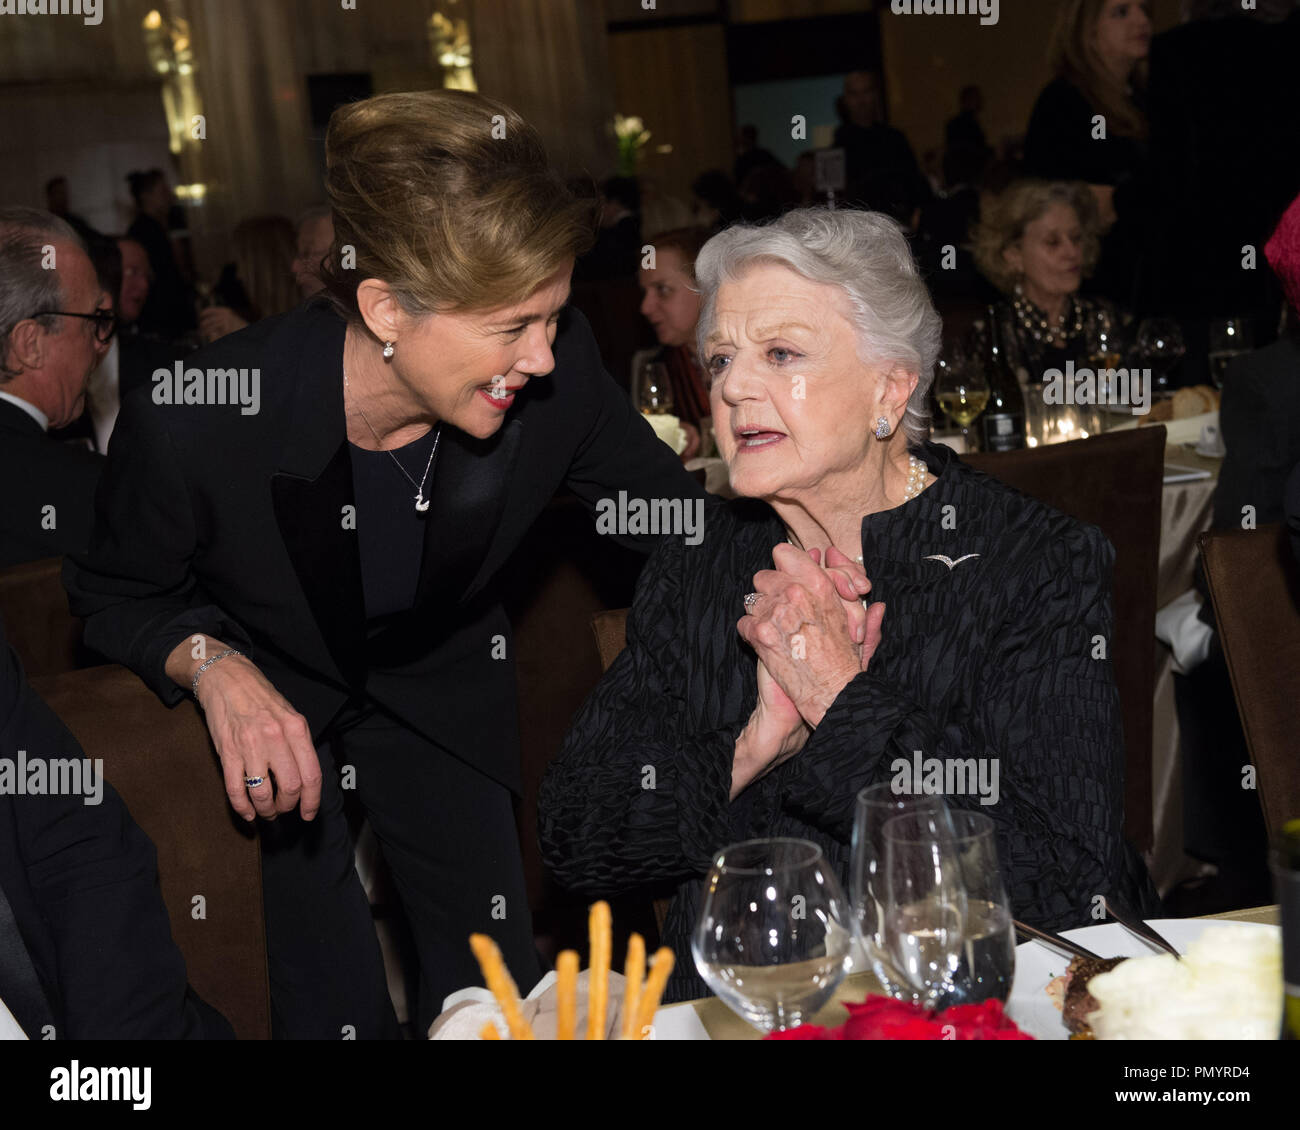 Actress Annette Benning (left) and Honorary Award recipient Angela Lansbury attend the 5th Annual Governors Awards at The Ray Dolby Ballroom at Hollywood & Highland Center® in Hollywood, CA, on Saturday, November 16, 2013.  File Reference # 32184 113  For Editorial Use Only -  All Rights Reserved Stock Photo